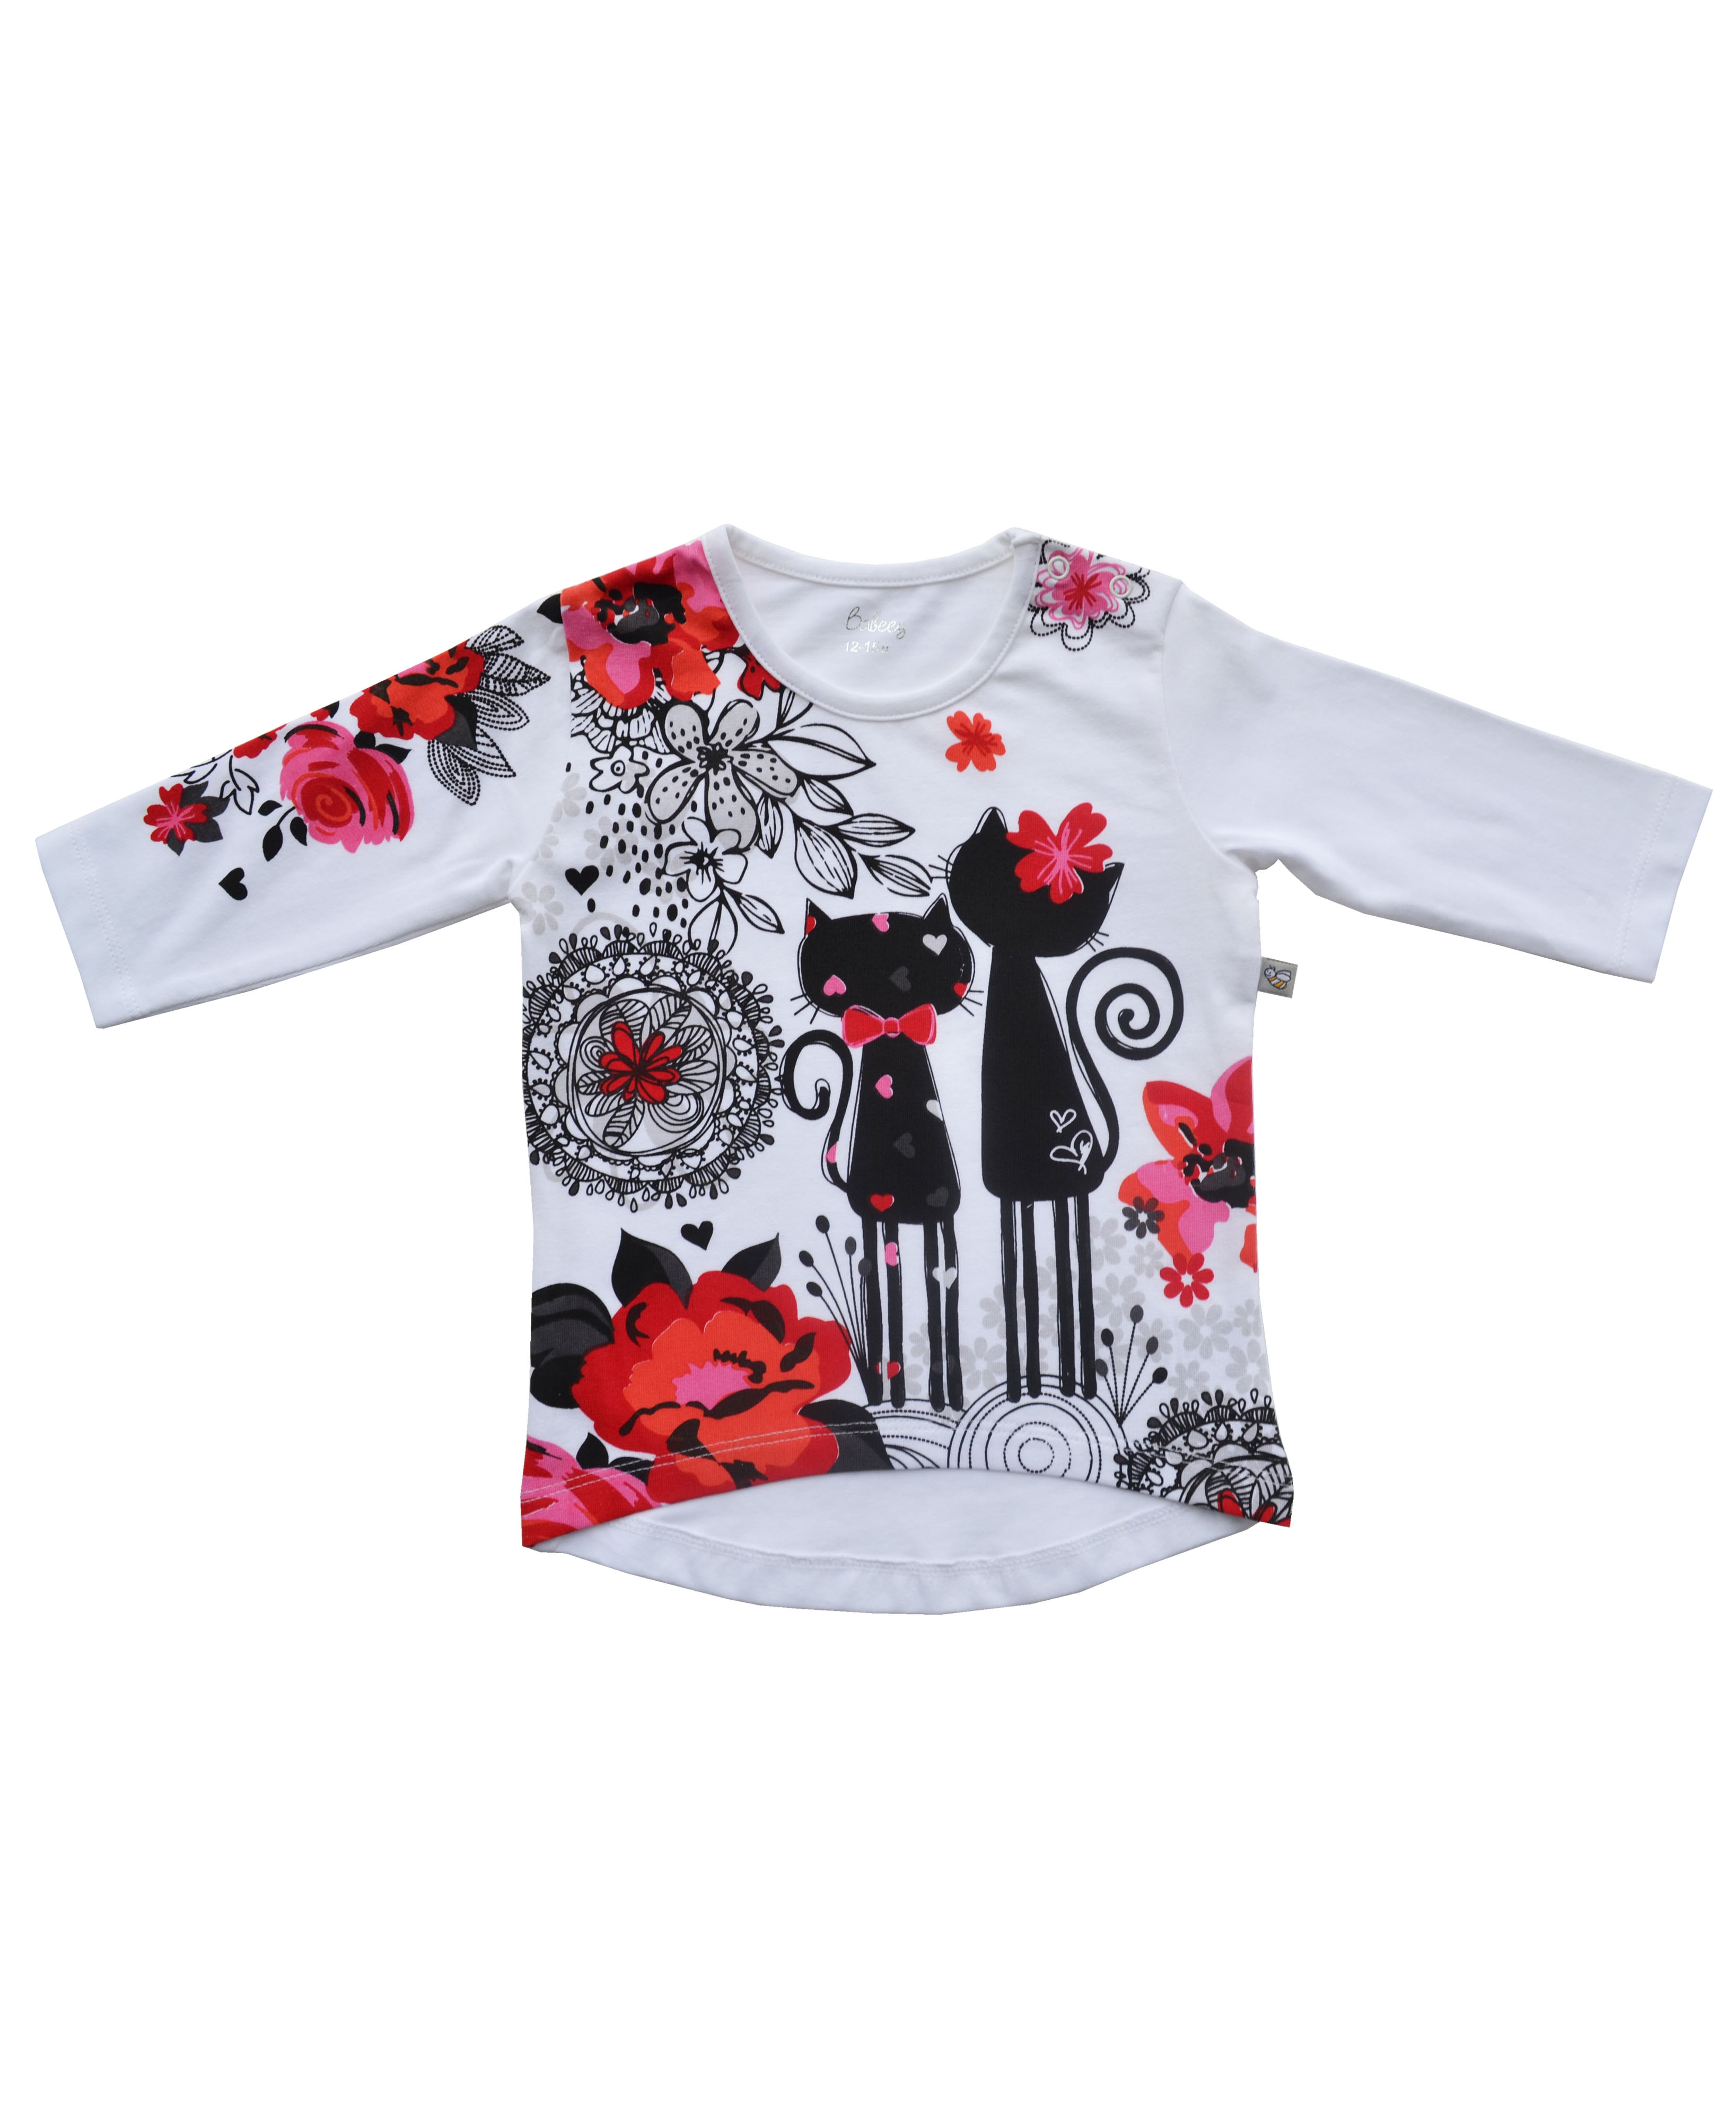 Babeez | Girls White Top with Flower & Cat Print (95%Cotton 5%Elasthan Jersey) undefined